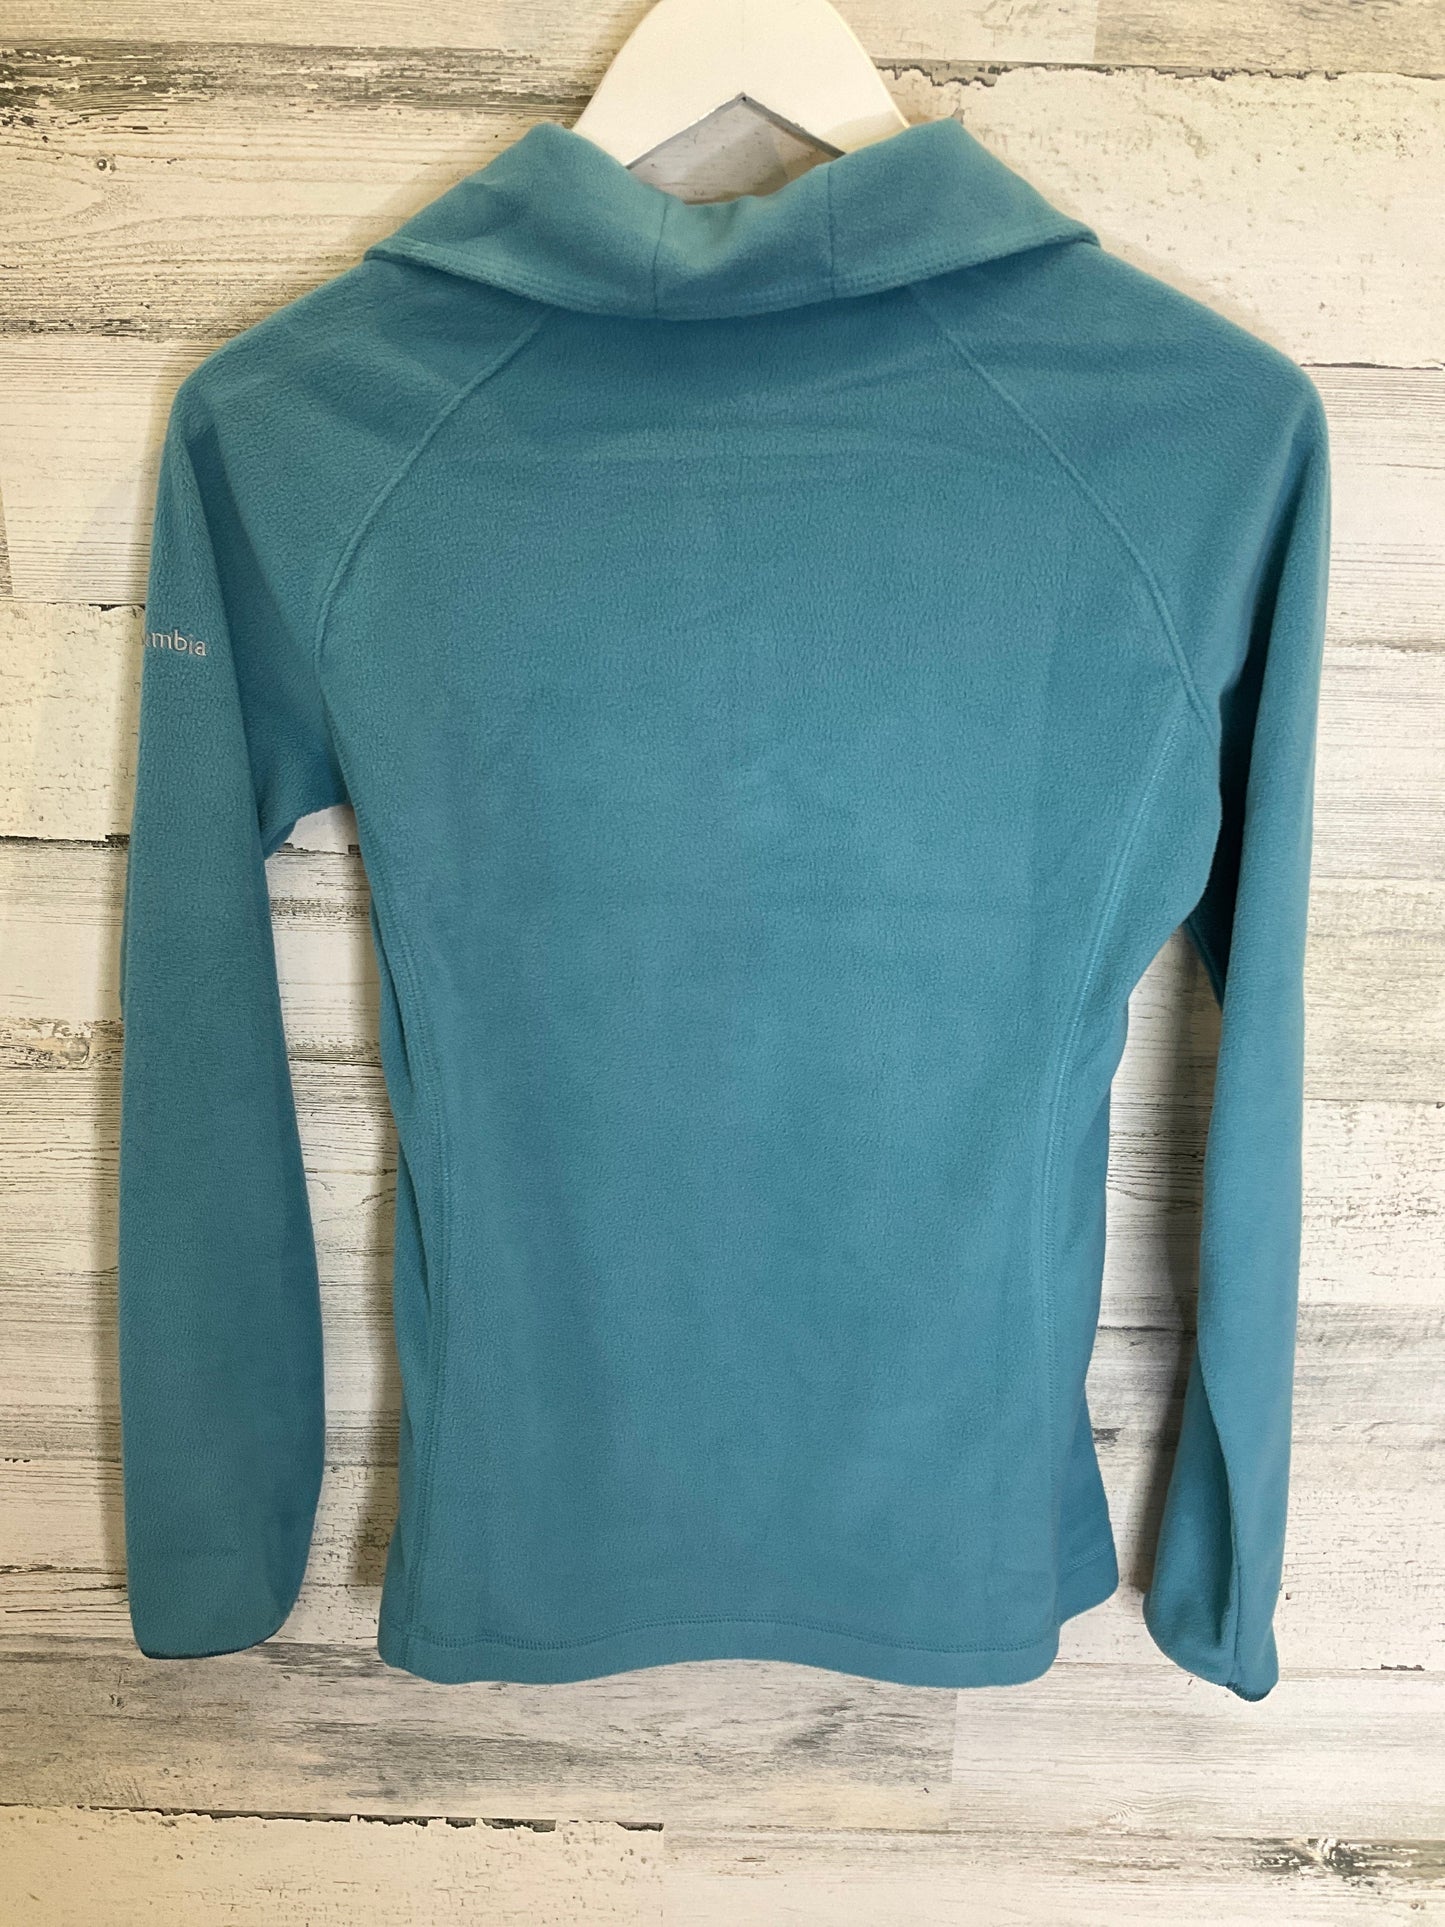 Teal Athletic Top Long Sleeve Collar Columbia, Size Xs